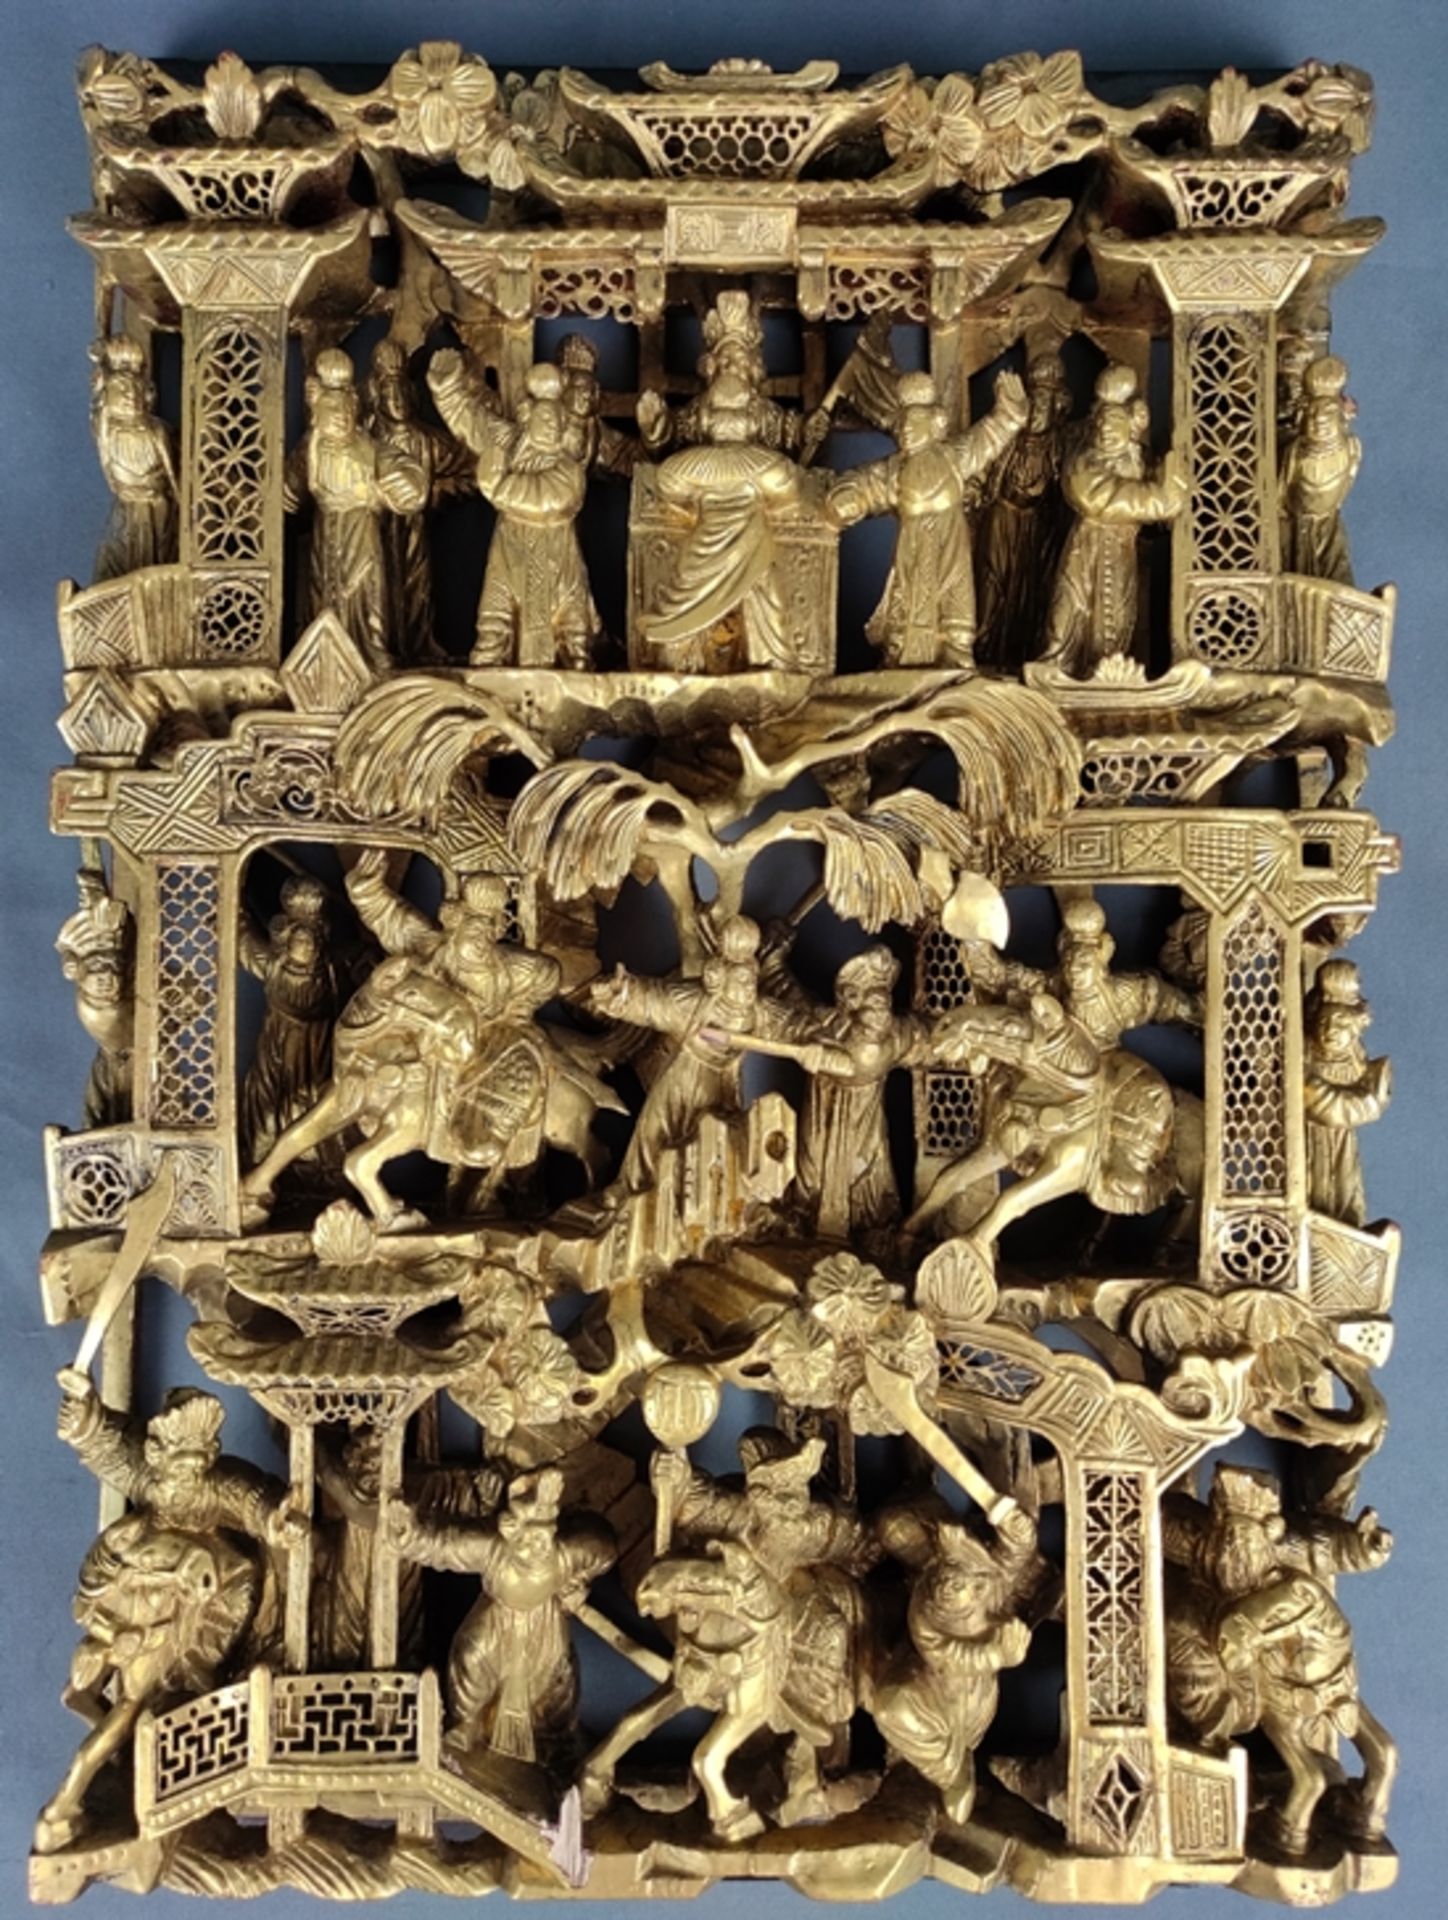 Chinese wall panel, elaborate carving with battle scenes, wood gold plated, mid 20th century, 44x30